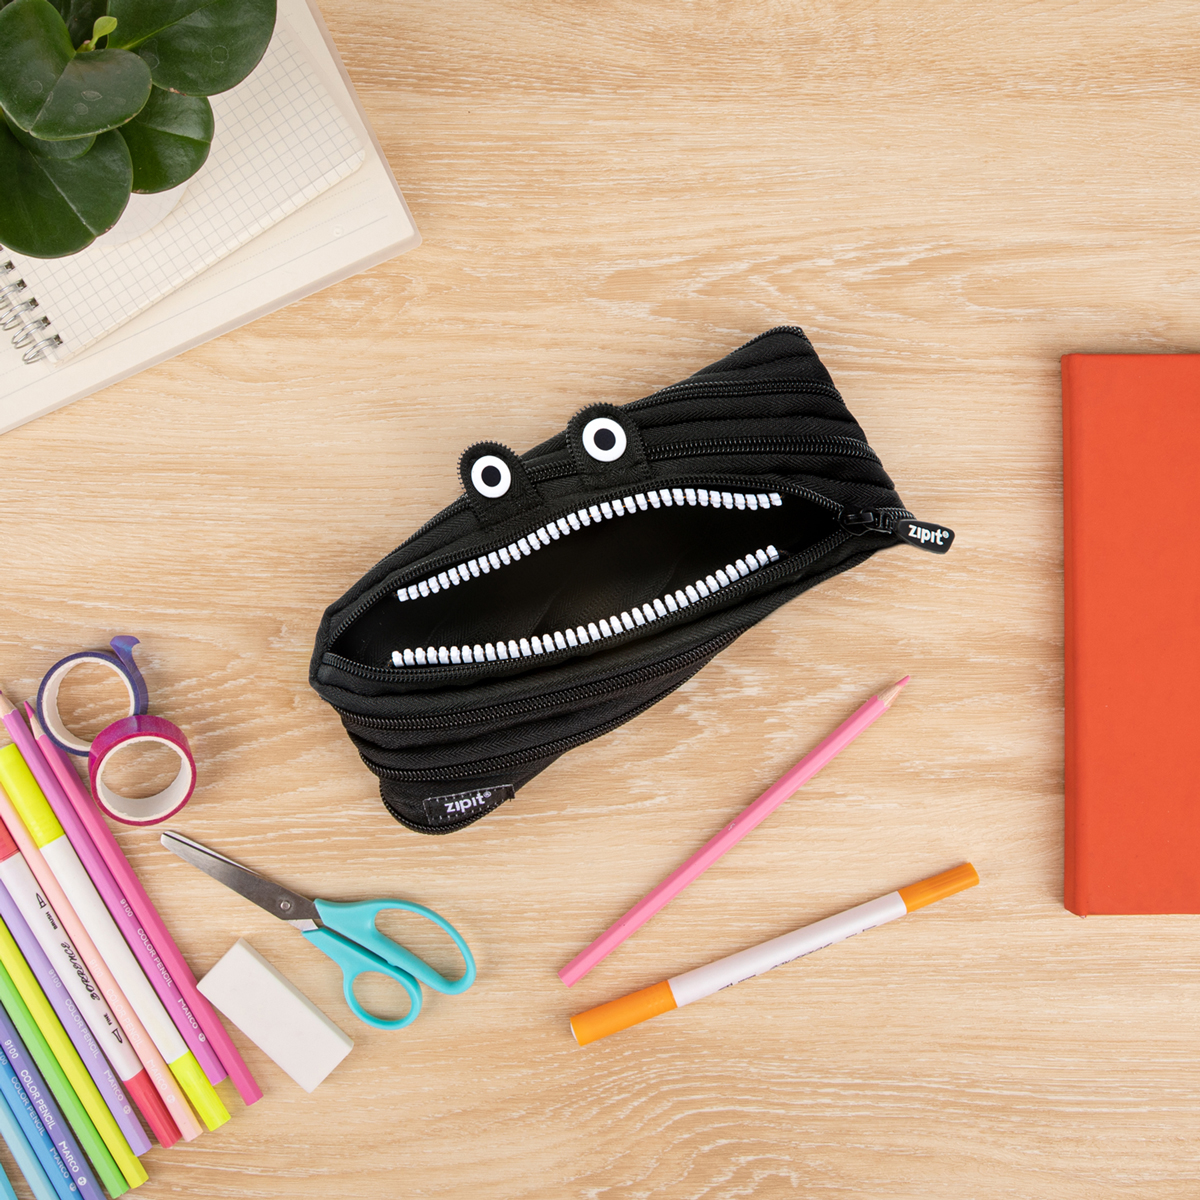 ZIPIT Monster Pencil Case for Kids, Holds up to 30 Pens, Machine Washable, Made of One Long Zipper! (Black) - image 5 of 6